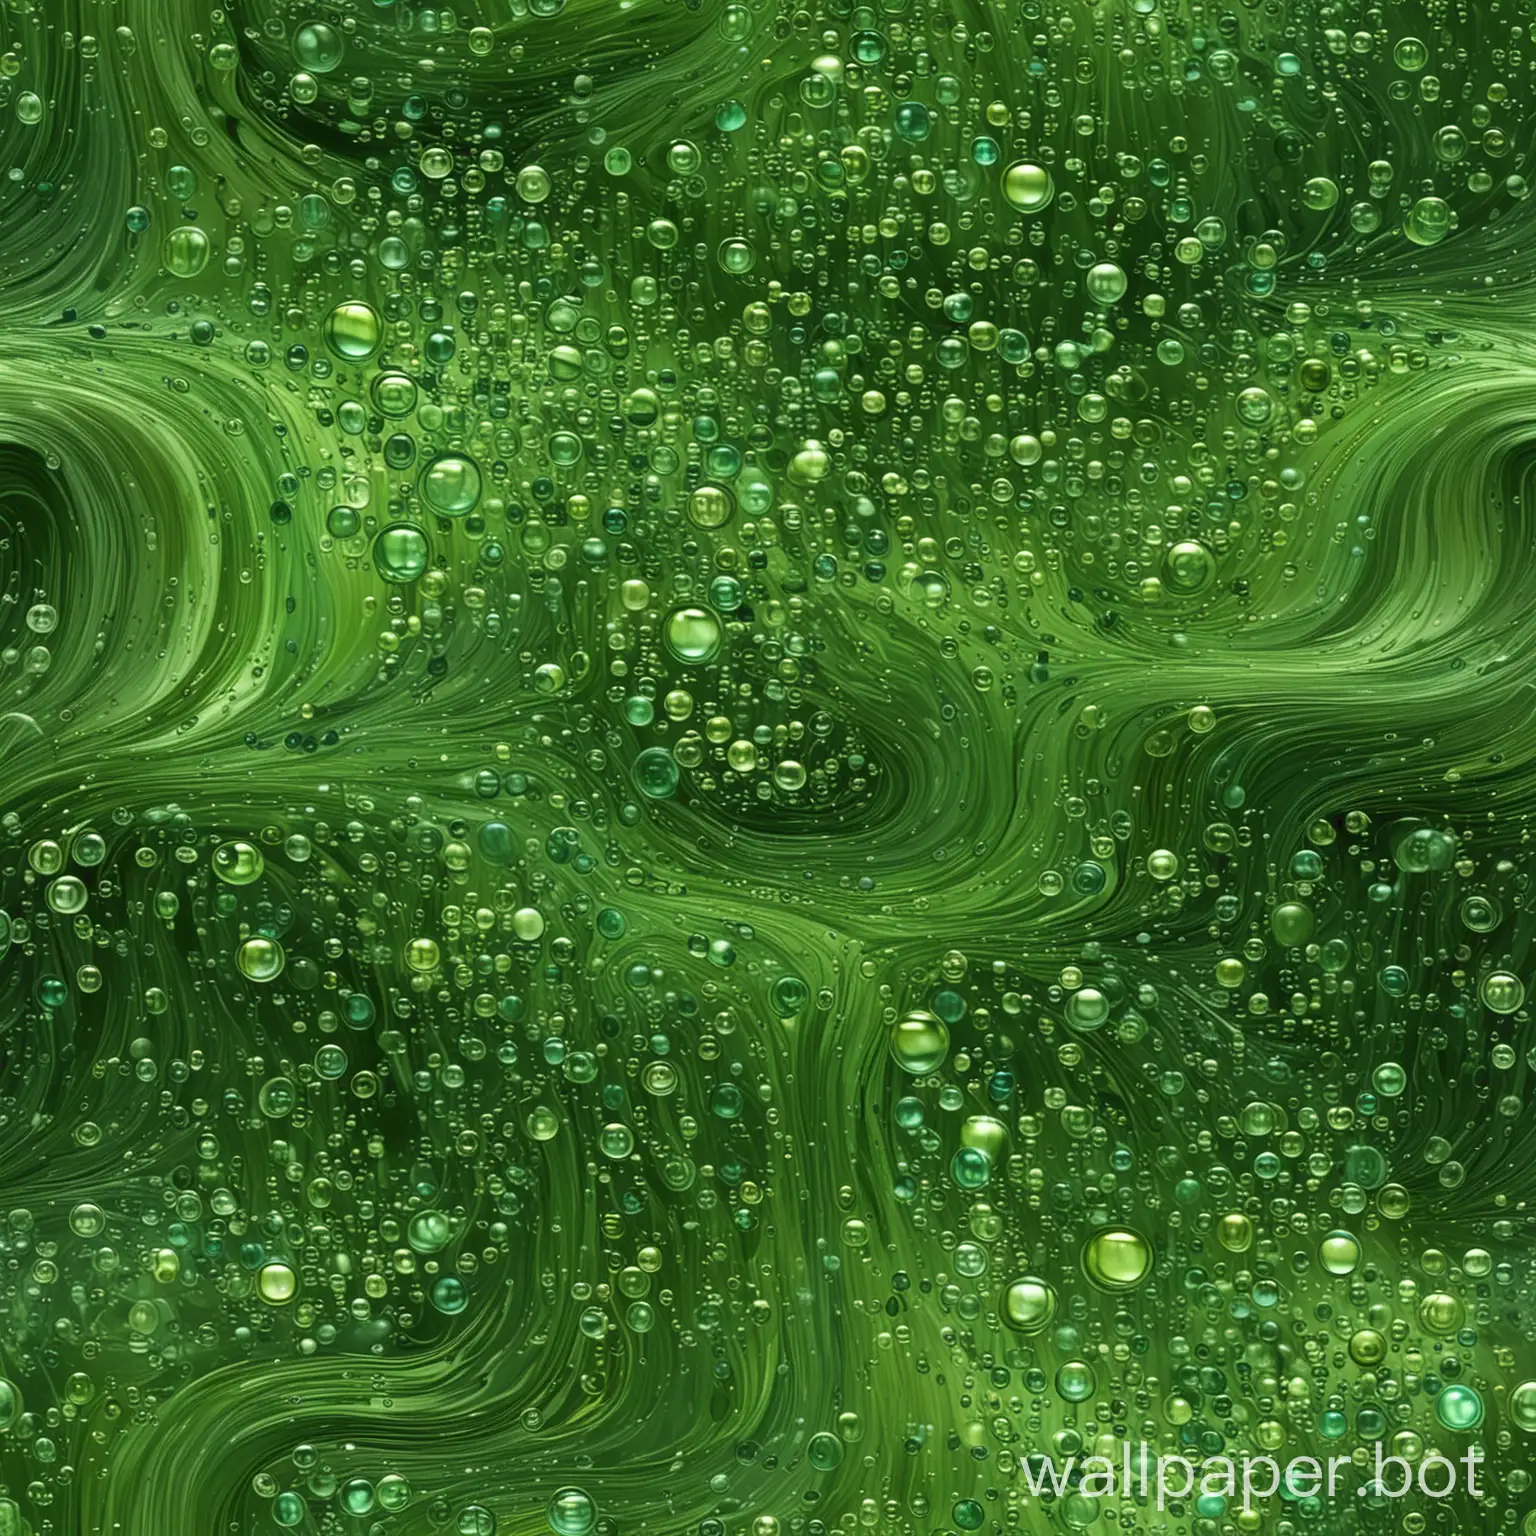 Generate a high-resolution, abstract wallpaper with a swirling, fluid design in various shades of green. The image should have a sense of depth and movement, resembling flowing liquid or waves. Include lighter and darker areas to create contrast and visual interest, with some bubbles or droplets scattered throughout to add texture. The overall effect should be dynamic and calming, with smooth transitions between different shades of green.